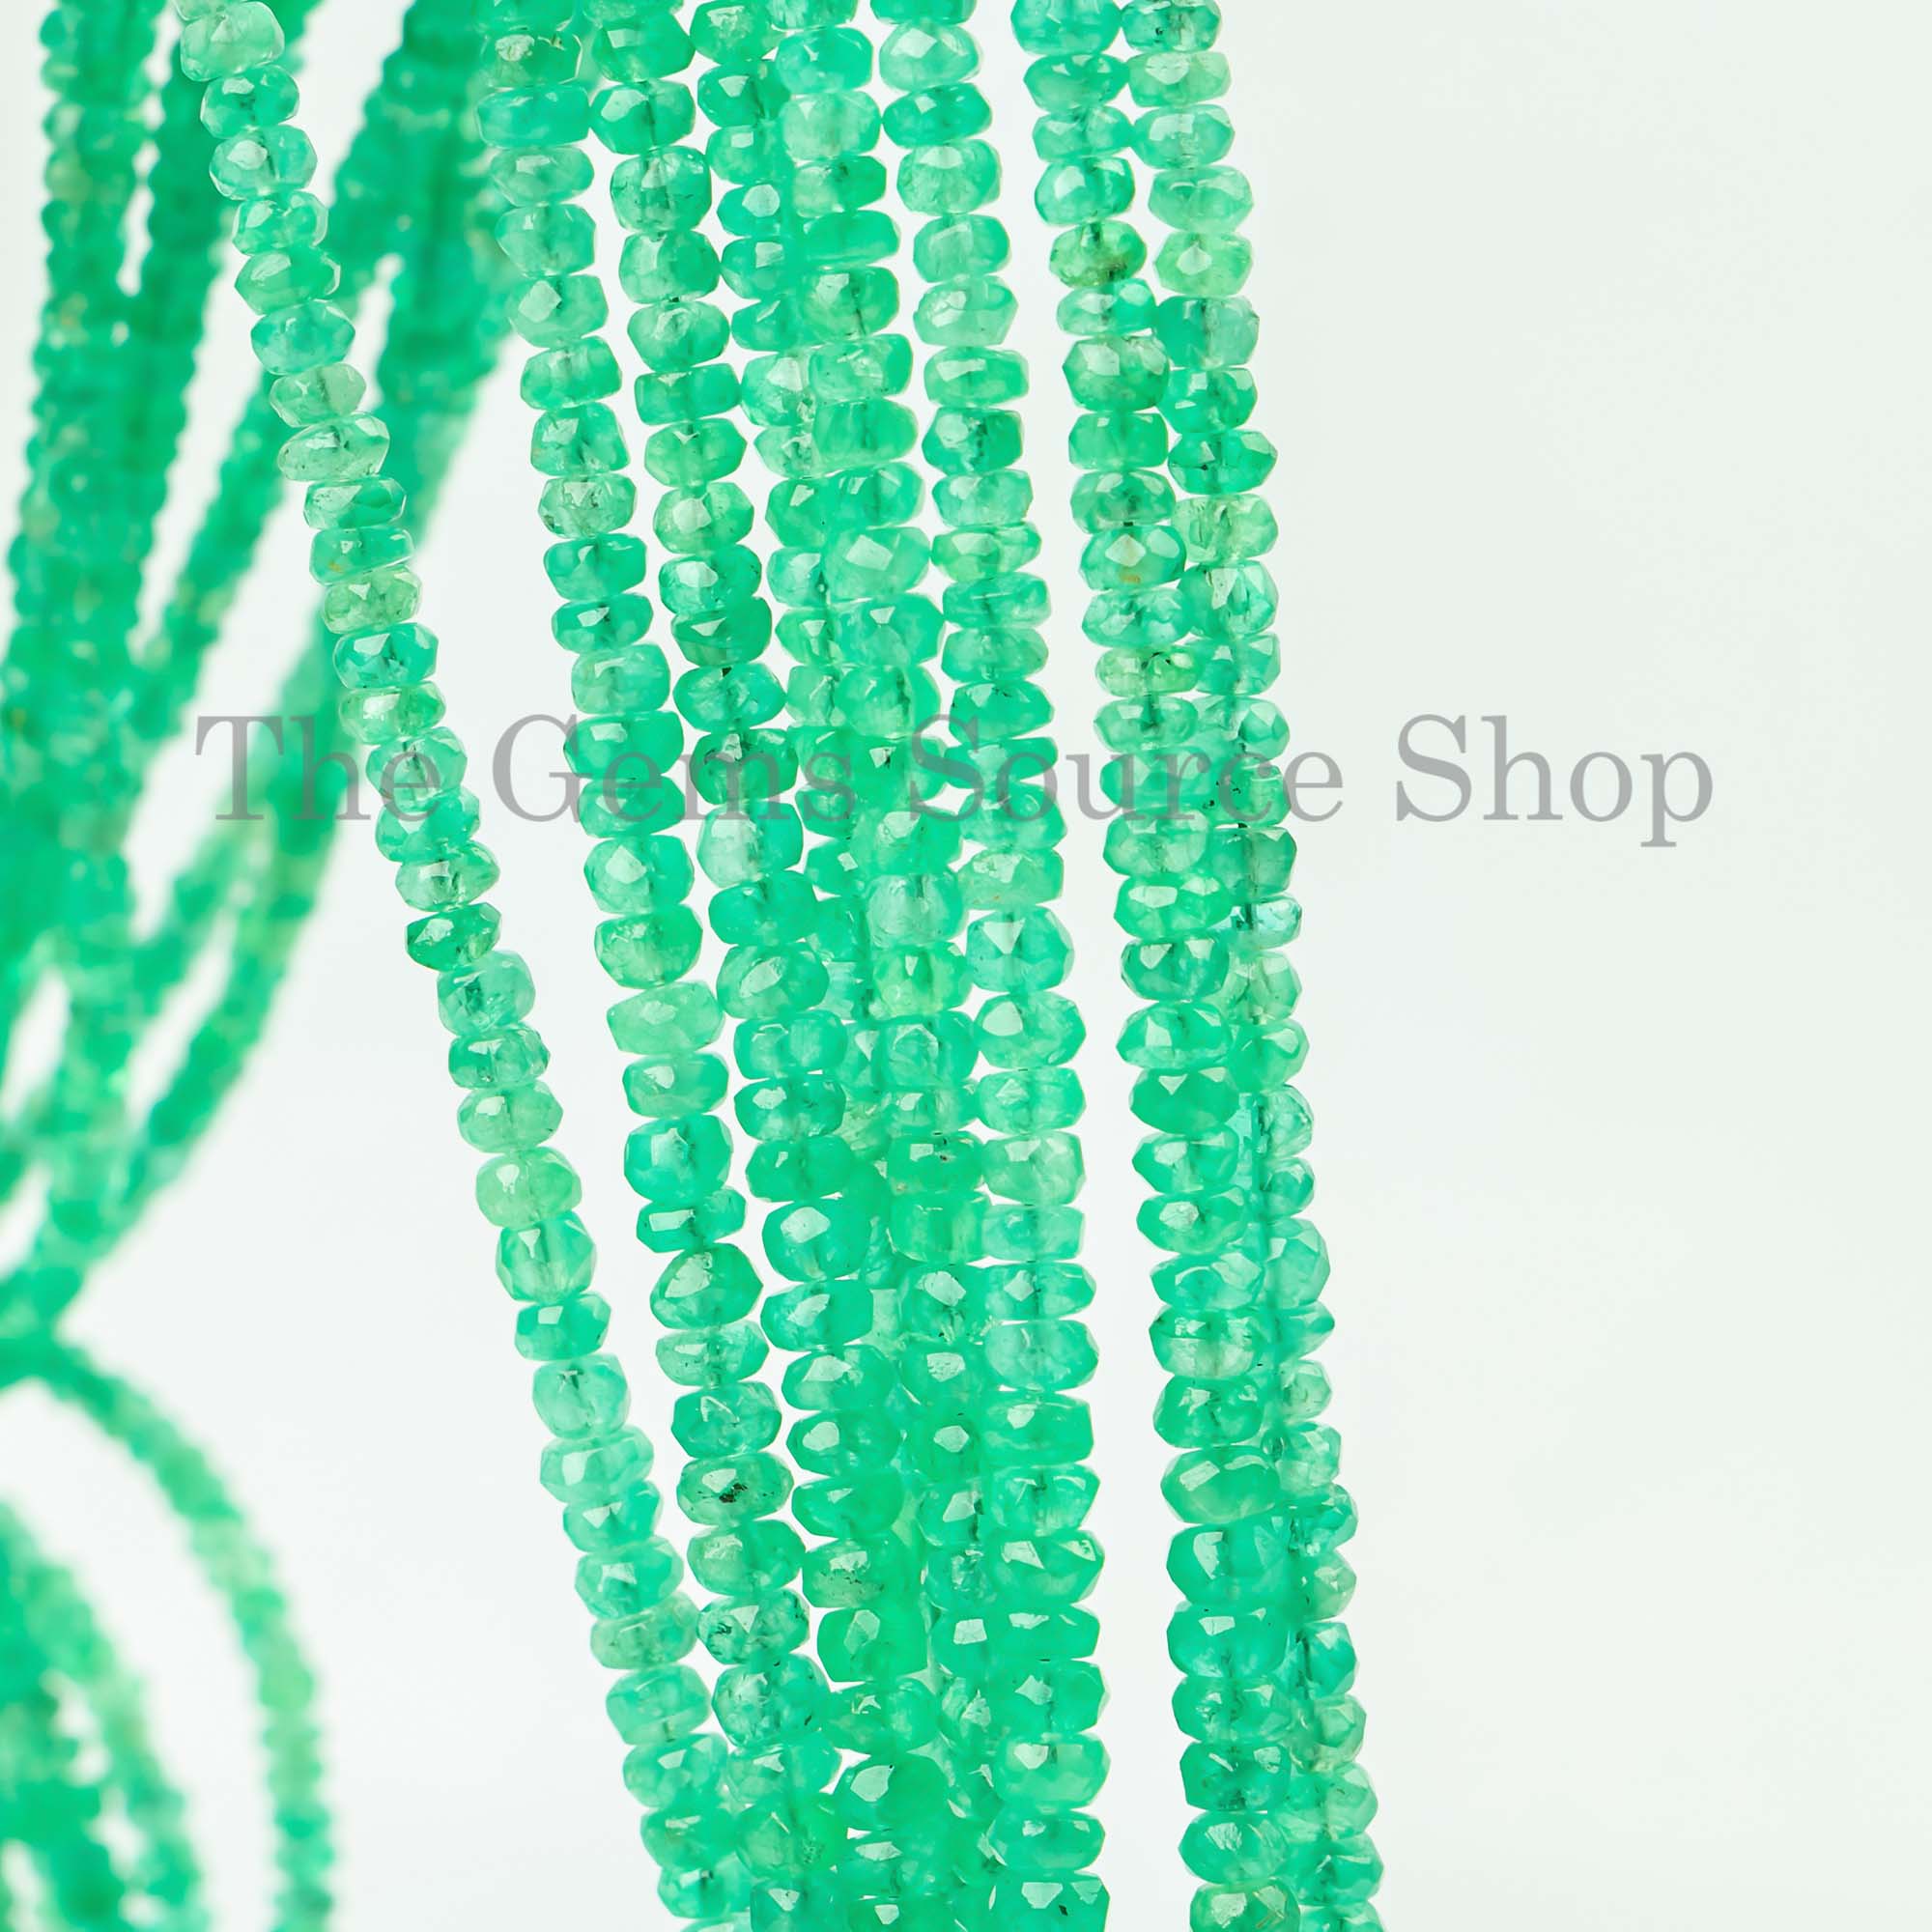 New Arrivals Natural Emerald Faceted Beads, Emerald Rondelle Beads, Emerald Gemstone Beads